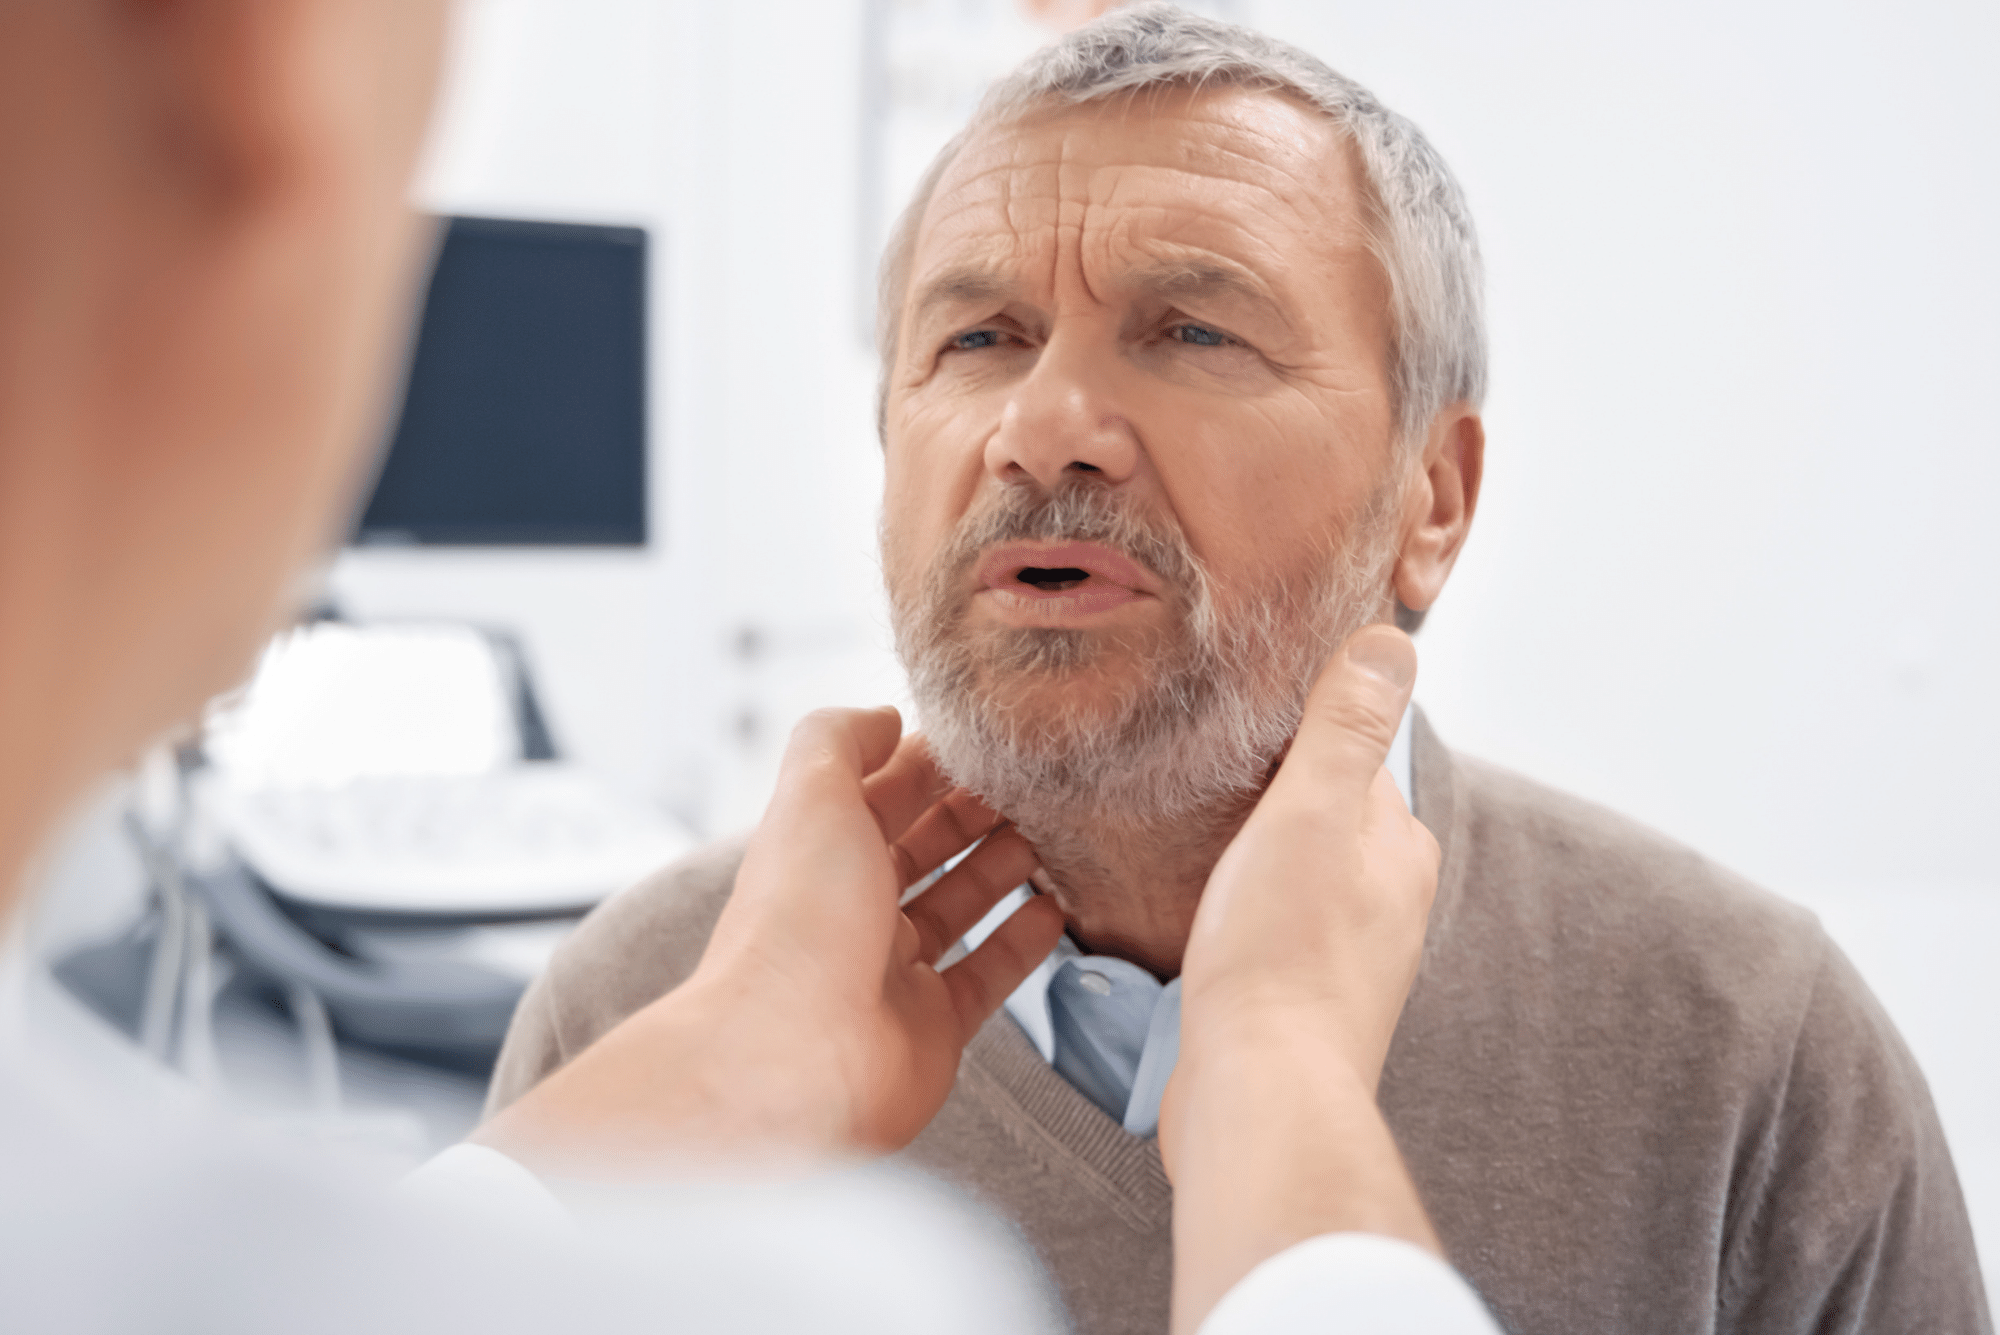 A doctor palpates for salivary gland tumors under the jaw of a bearded older gentleman.